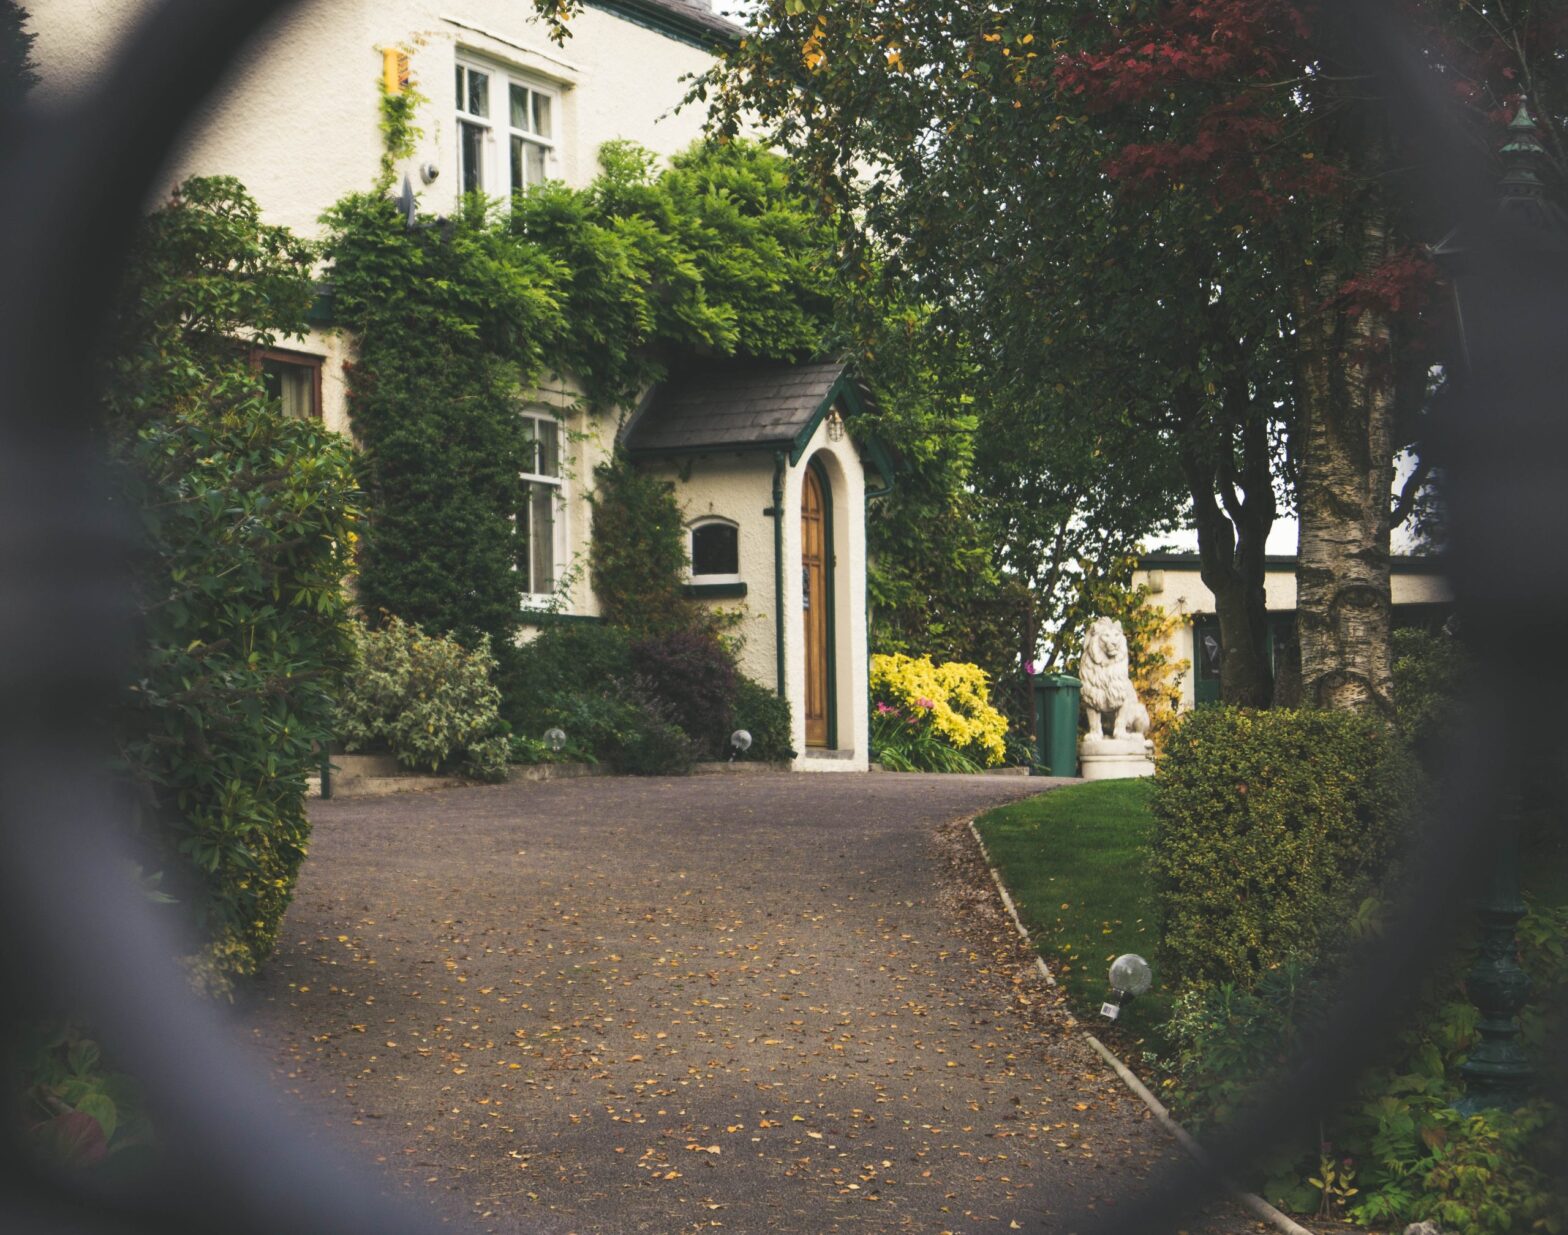 View of a house through the opening of a fence.